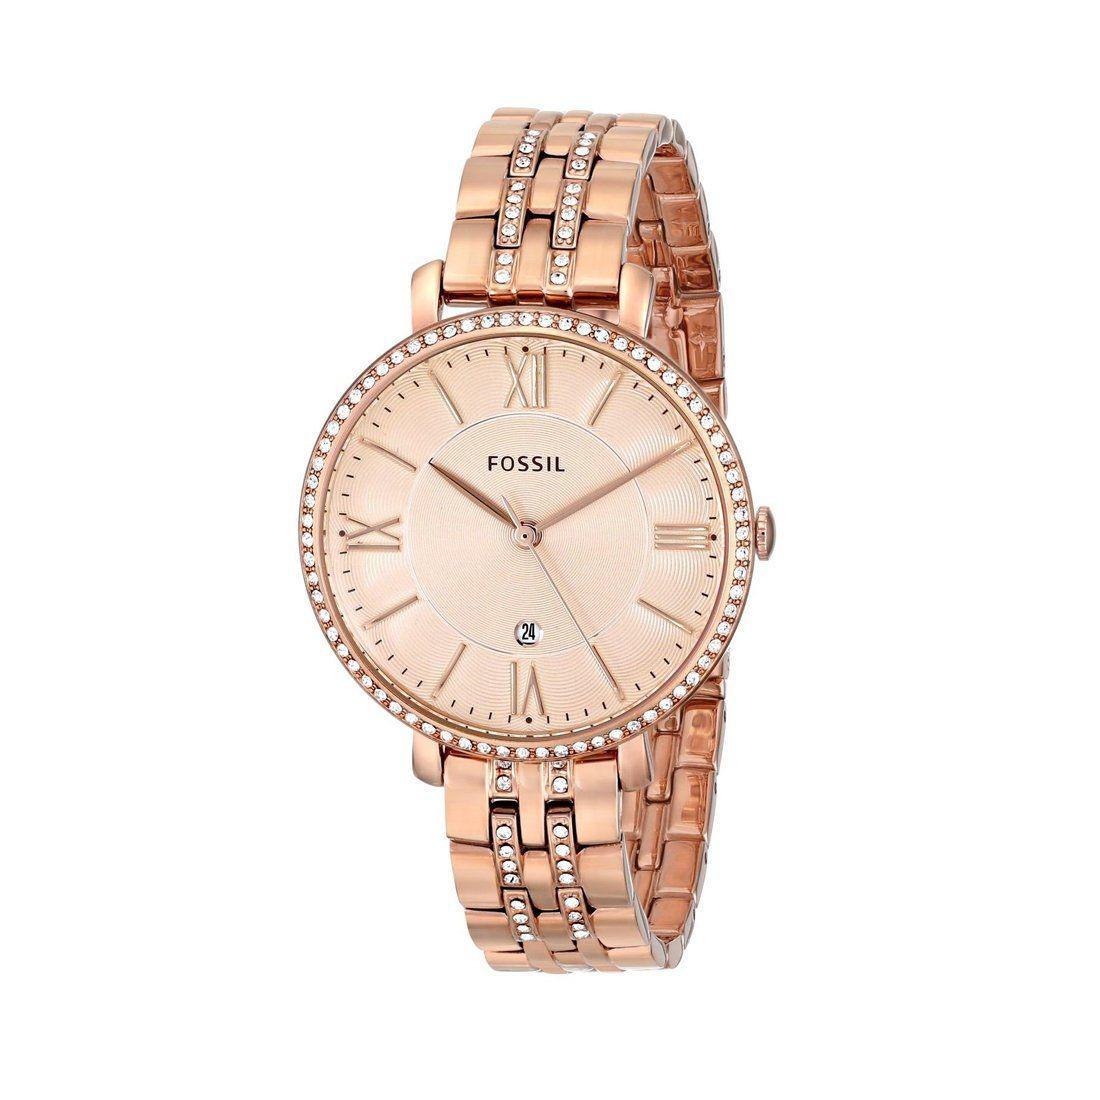 Fossil Ladies Jacqueline Rose Gold Watch ES3546 Stainless Steel Stone Set 796483081680